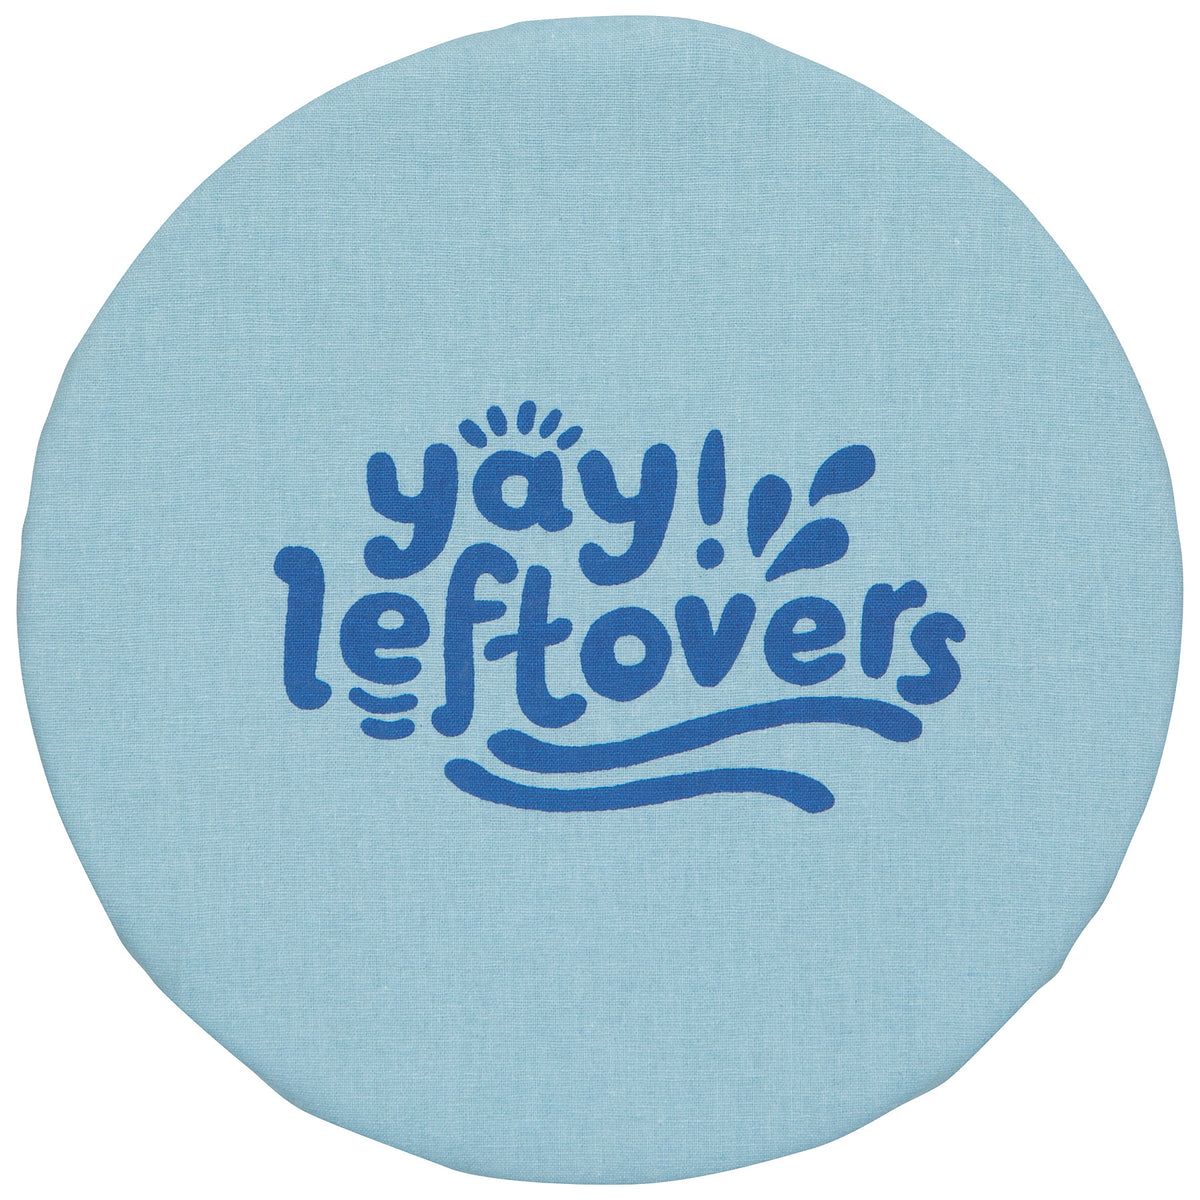 Yay! Leftovers Bowl Covers, Set of 2